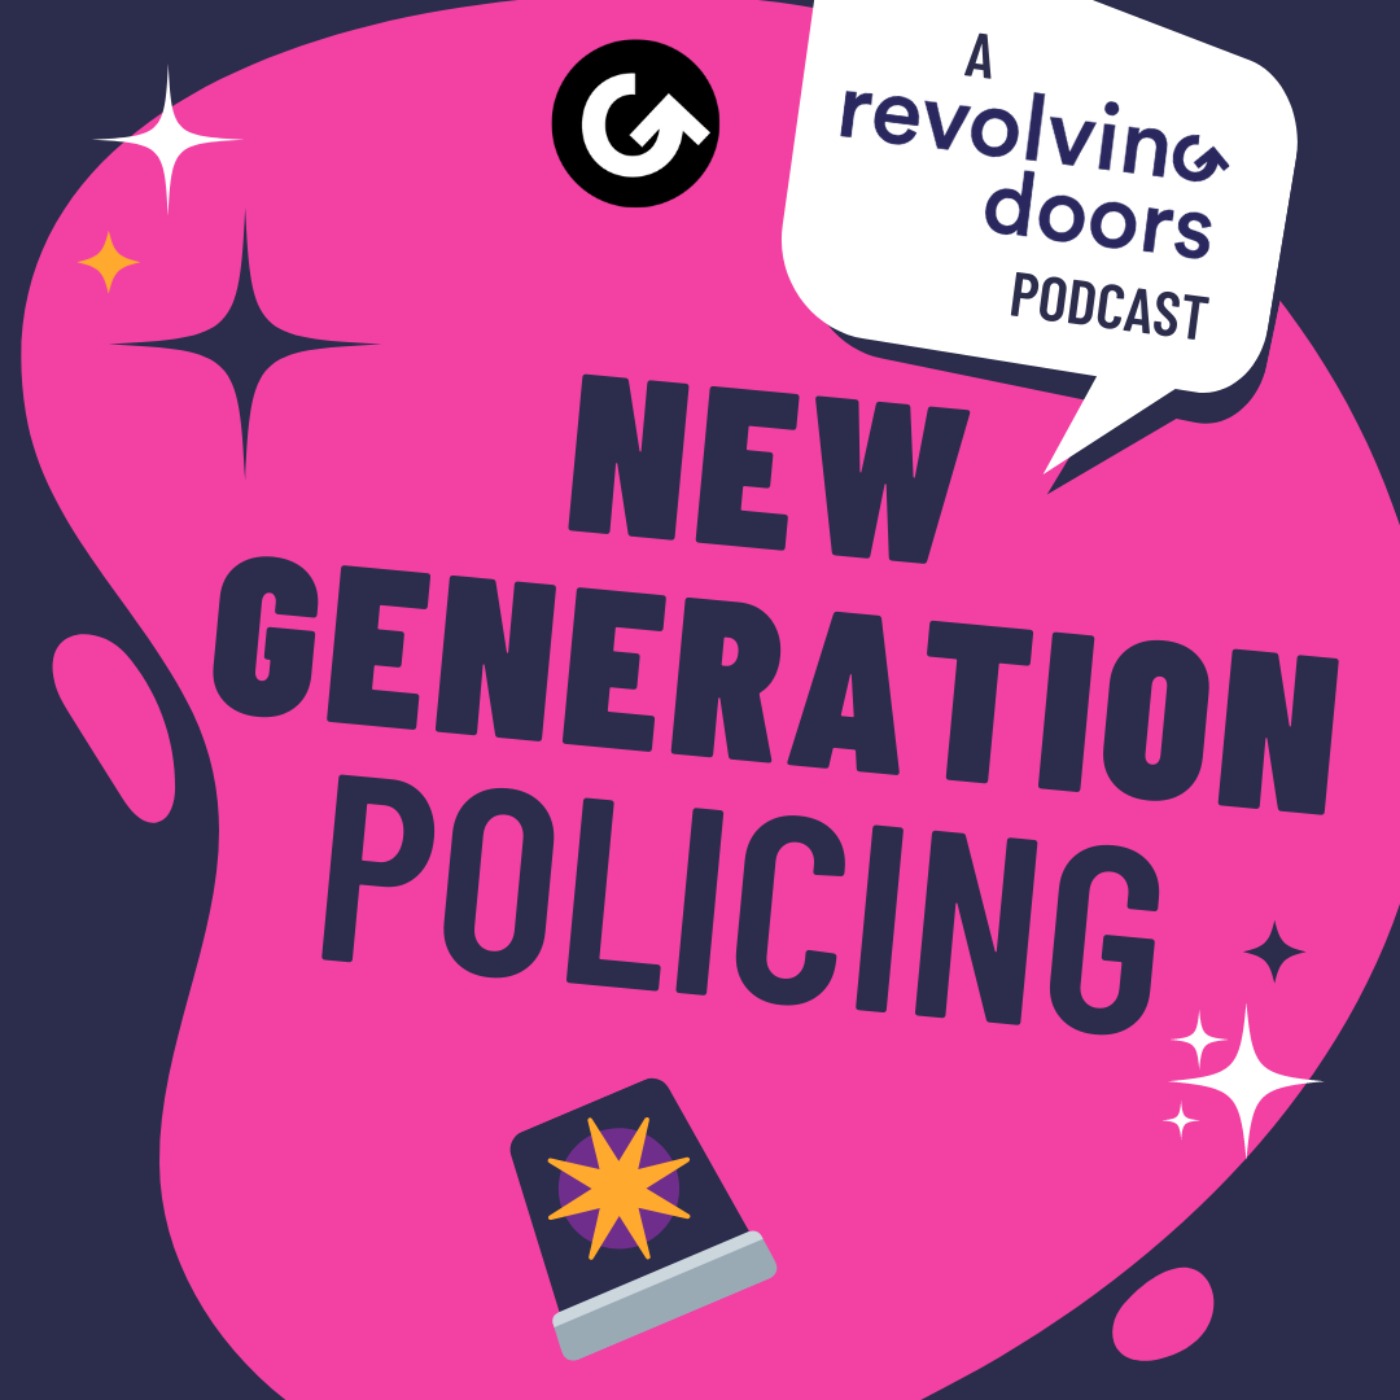 New Generation Policing ep. 2: Policing perspectives across the pond